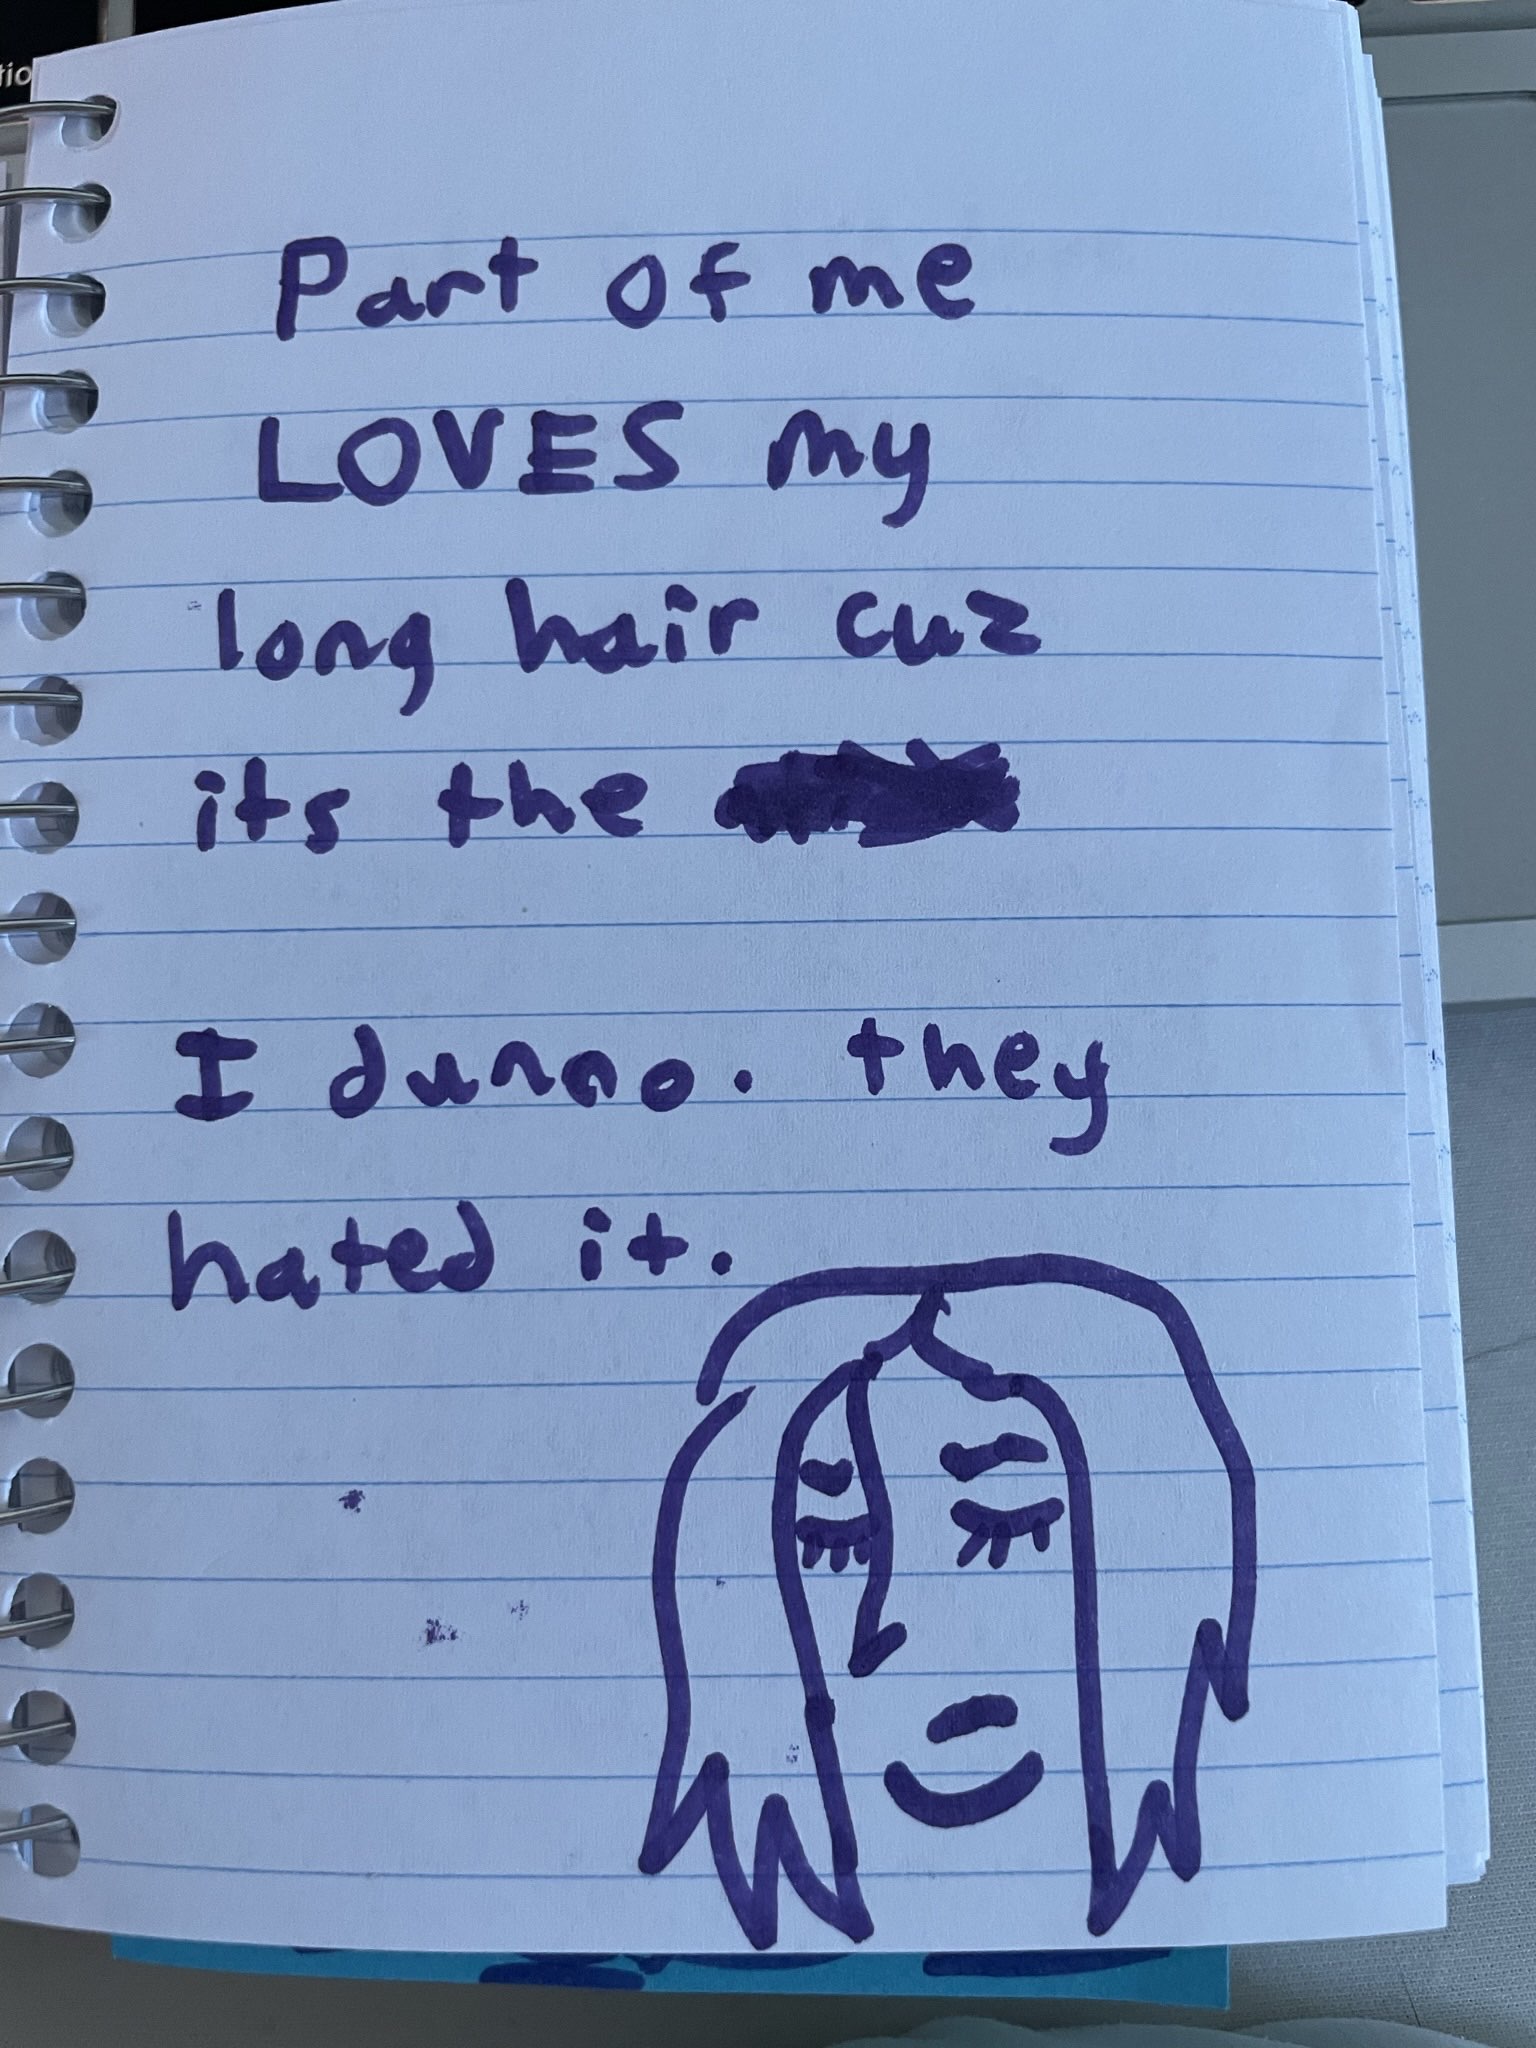  part of me loves my long hair cuz it's the (word crossed out)  I dunno. they hated it. a drawing of me closing my eyes and bowing my head in shame slightly with medium length androgynous hair.